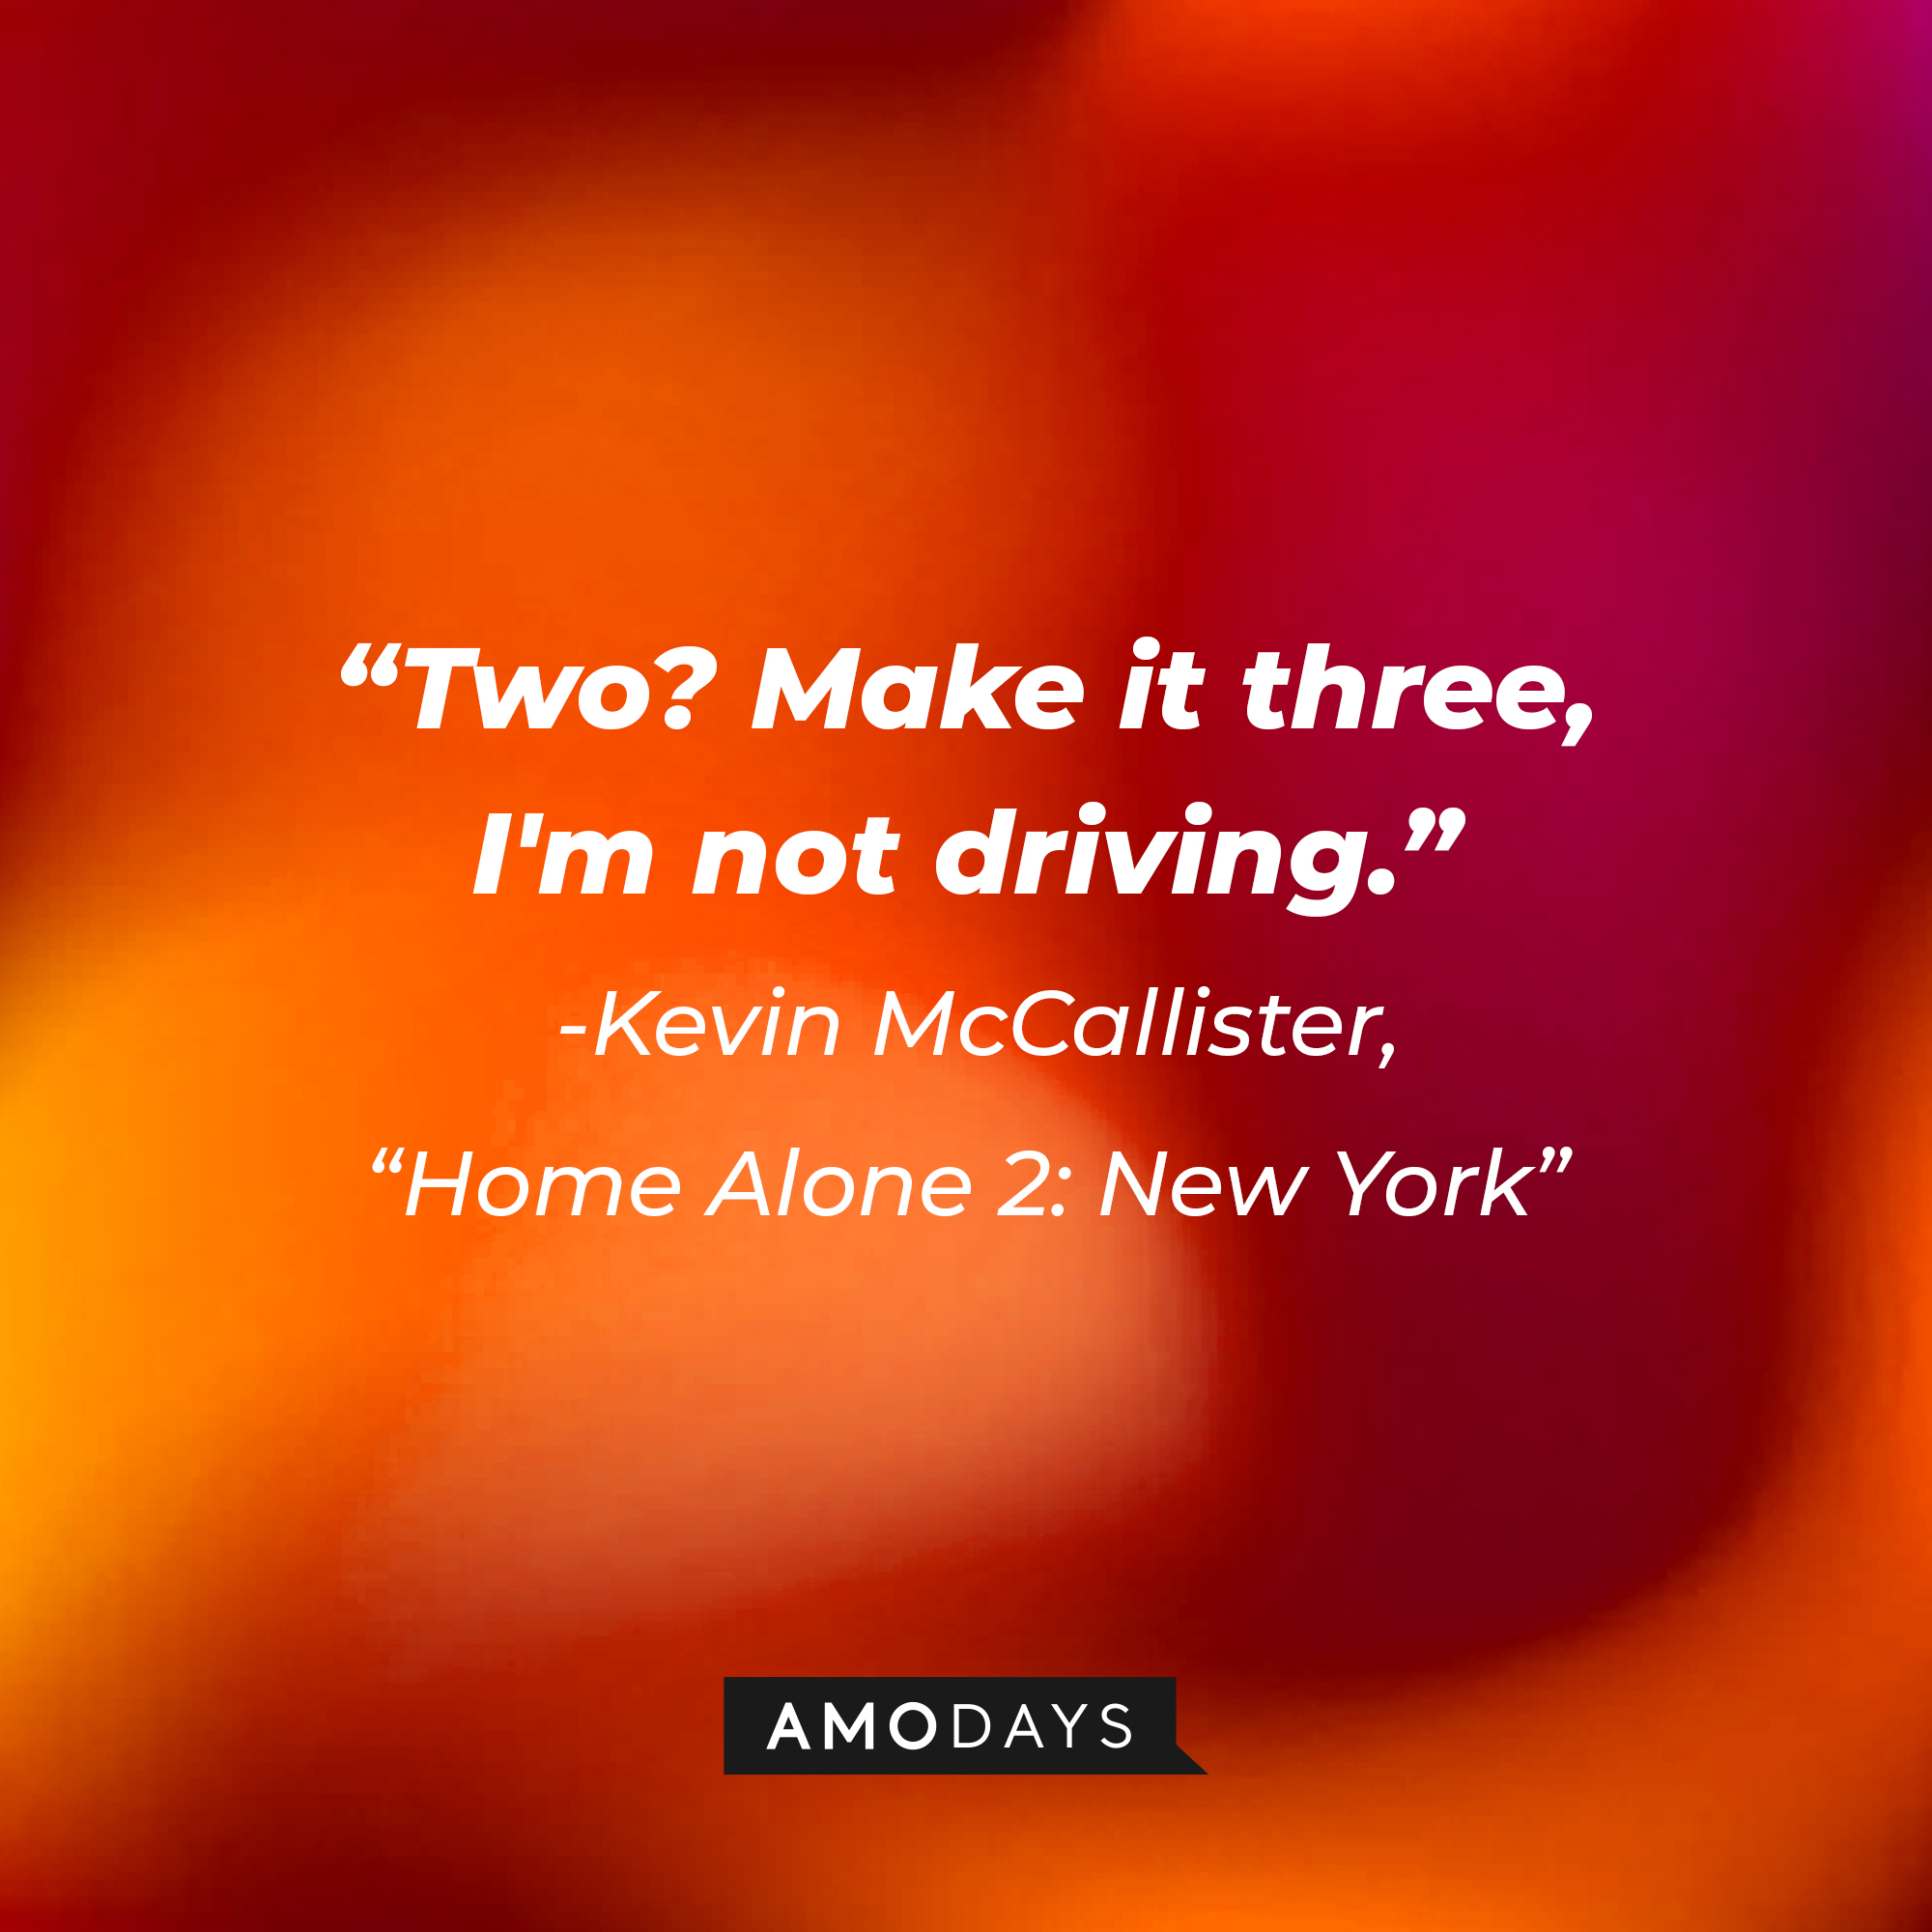 Kevin McCallister's quote: Two? Make it three, I'm not driving." | Source: AmoDays